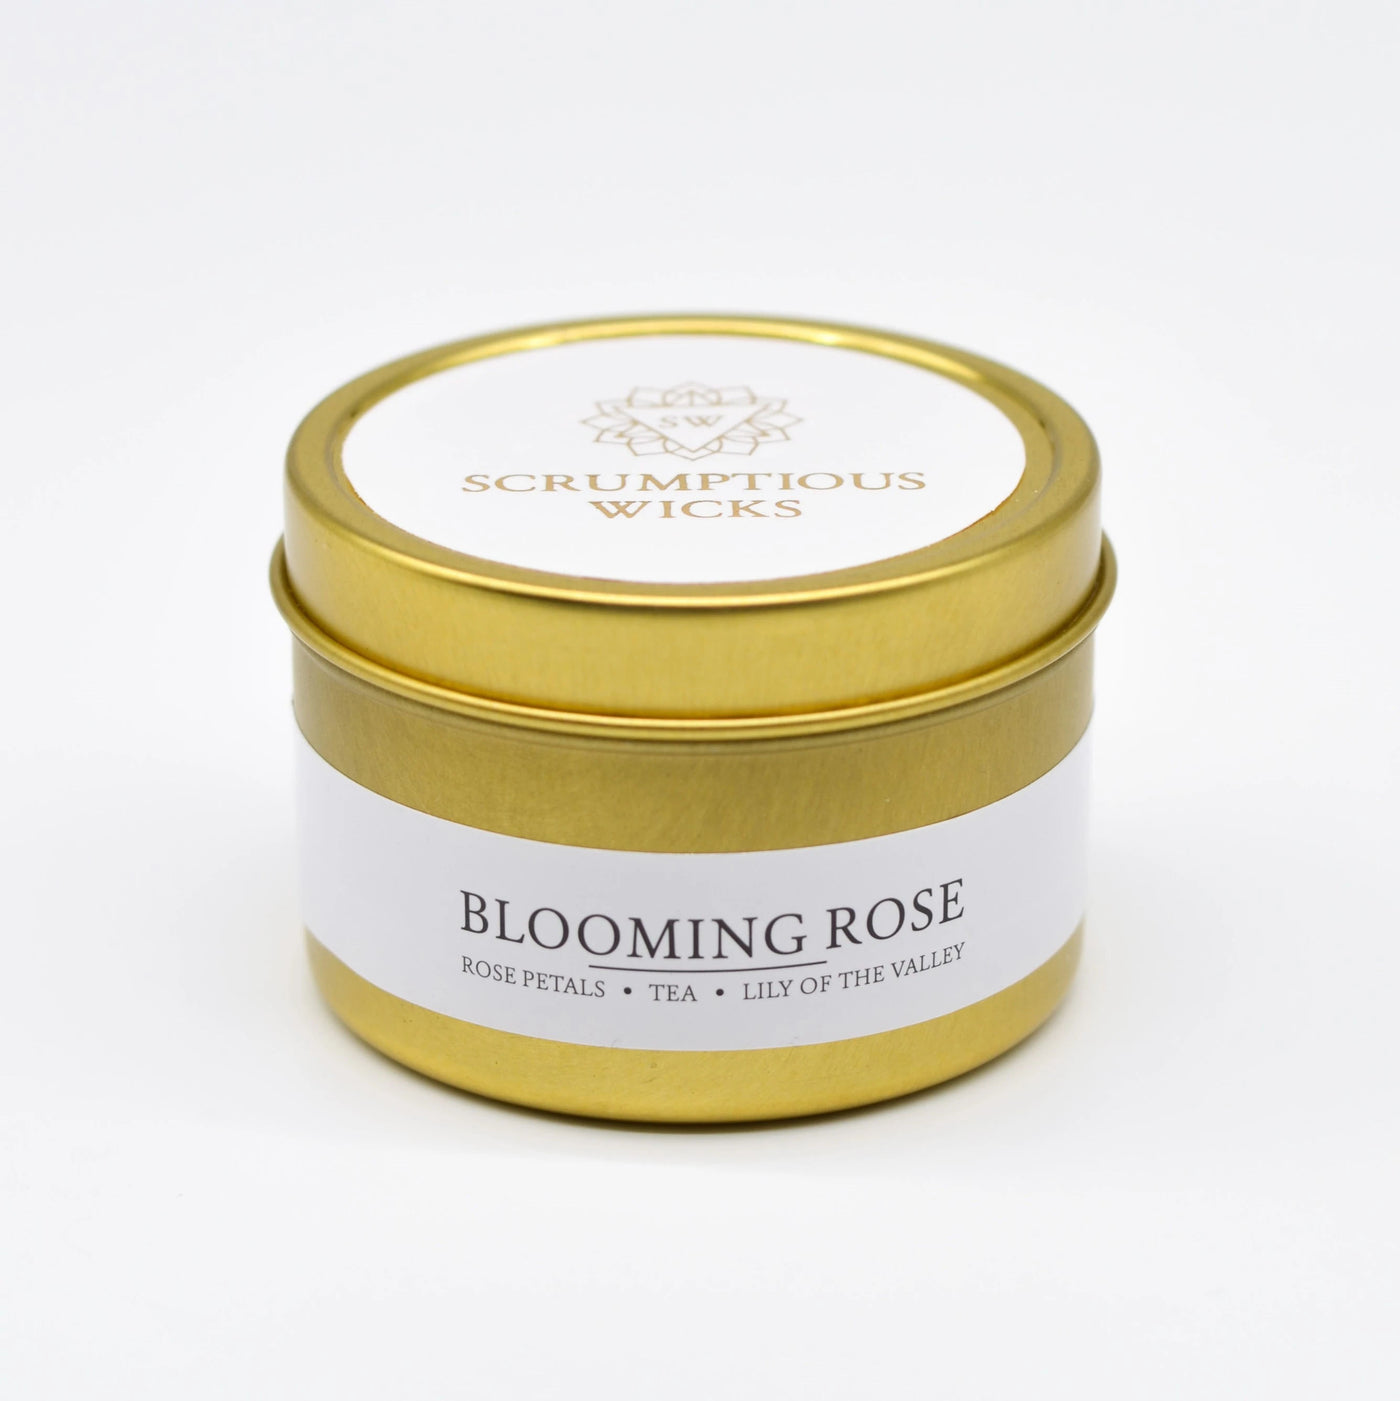 Blooming Rose Tin candle by Scrumptious Wicks